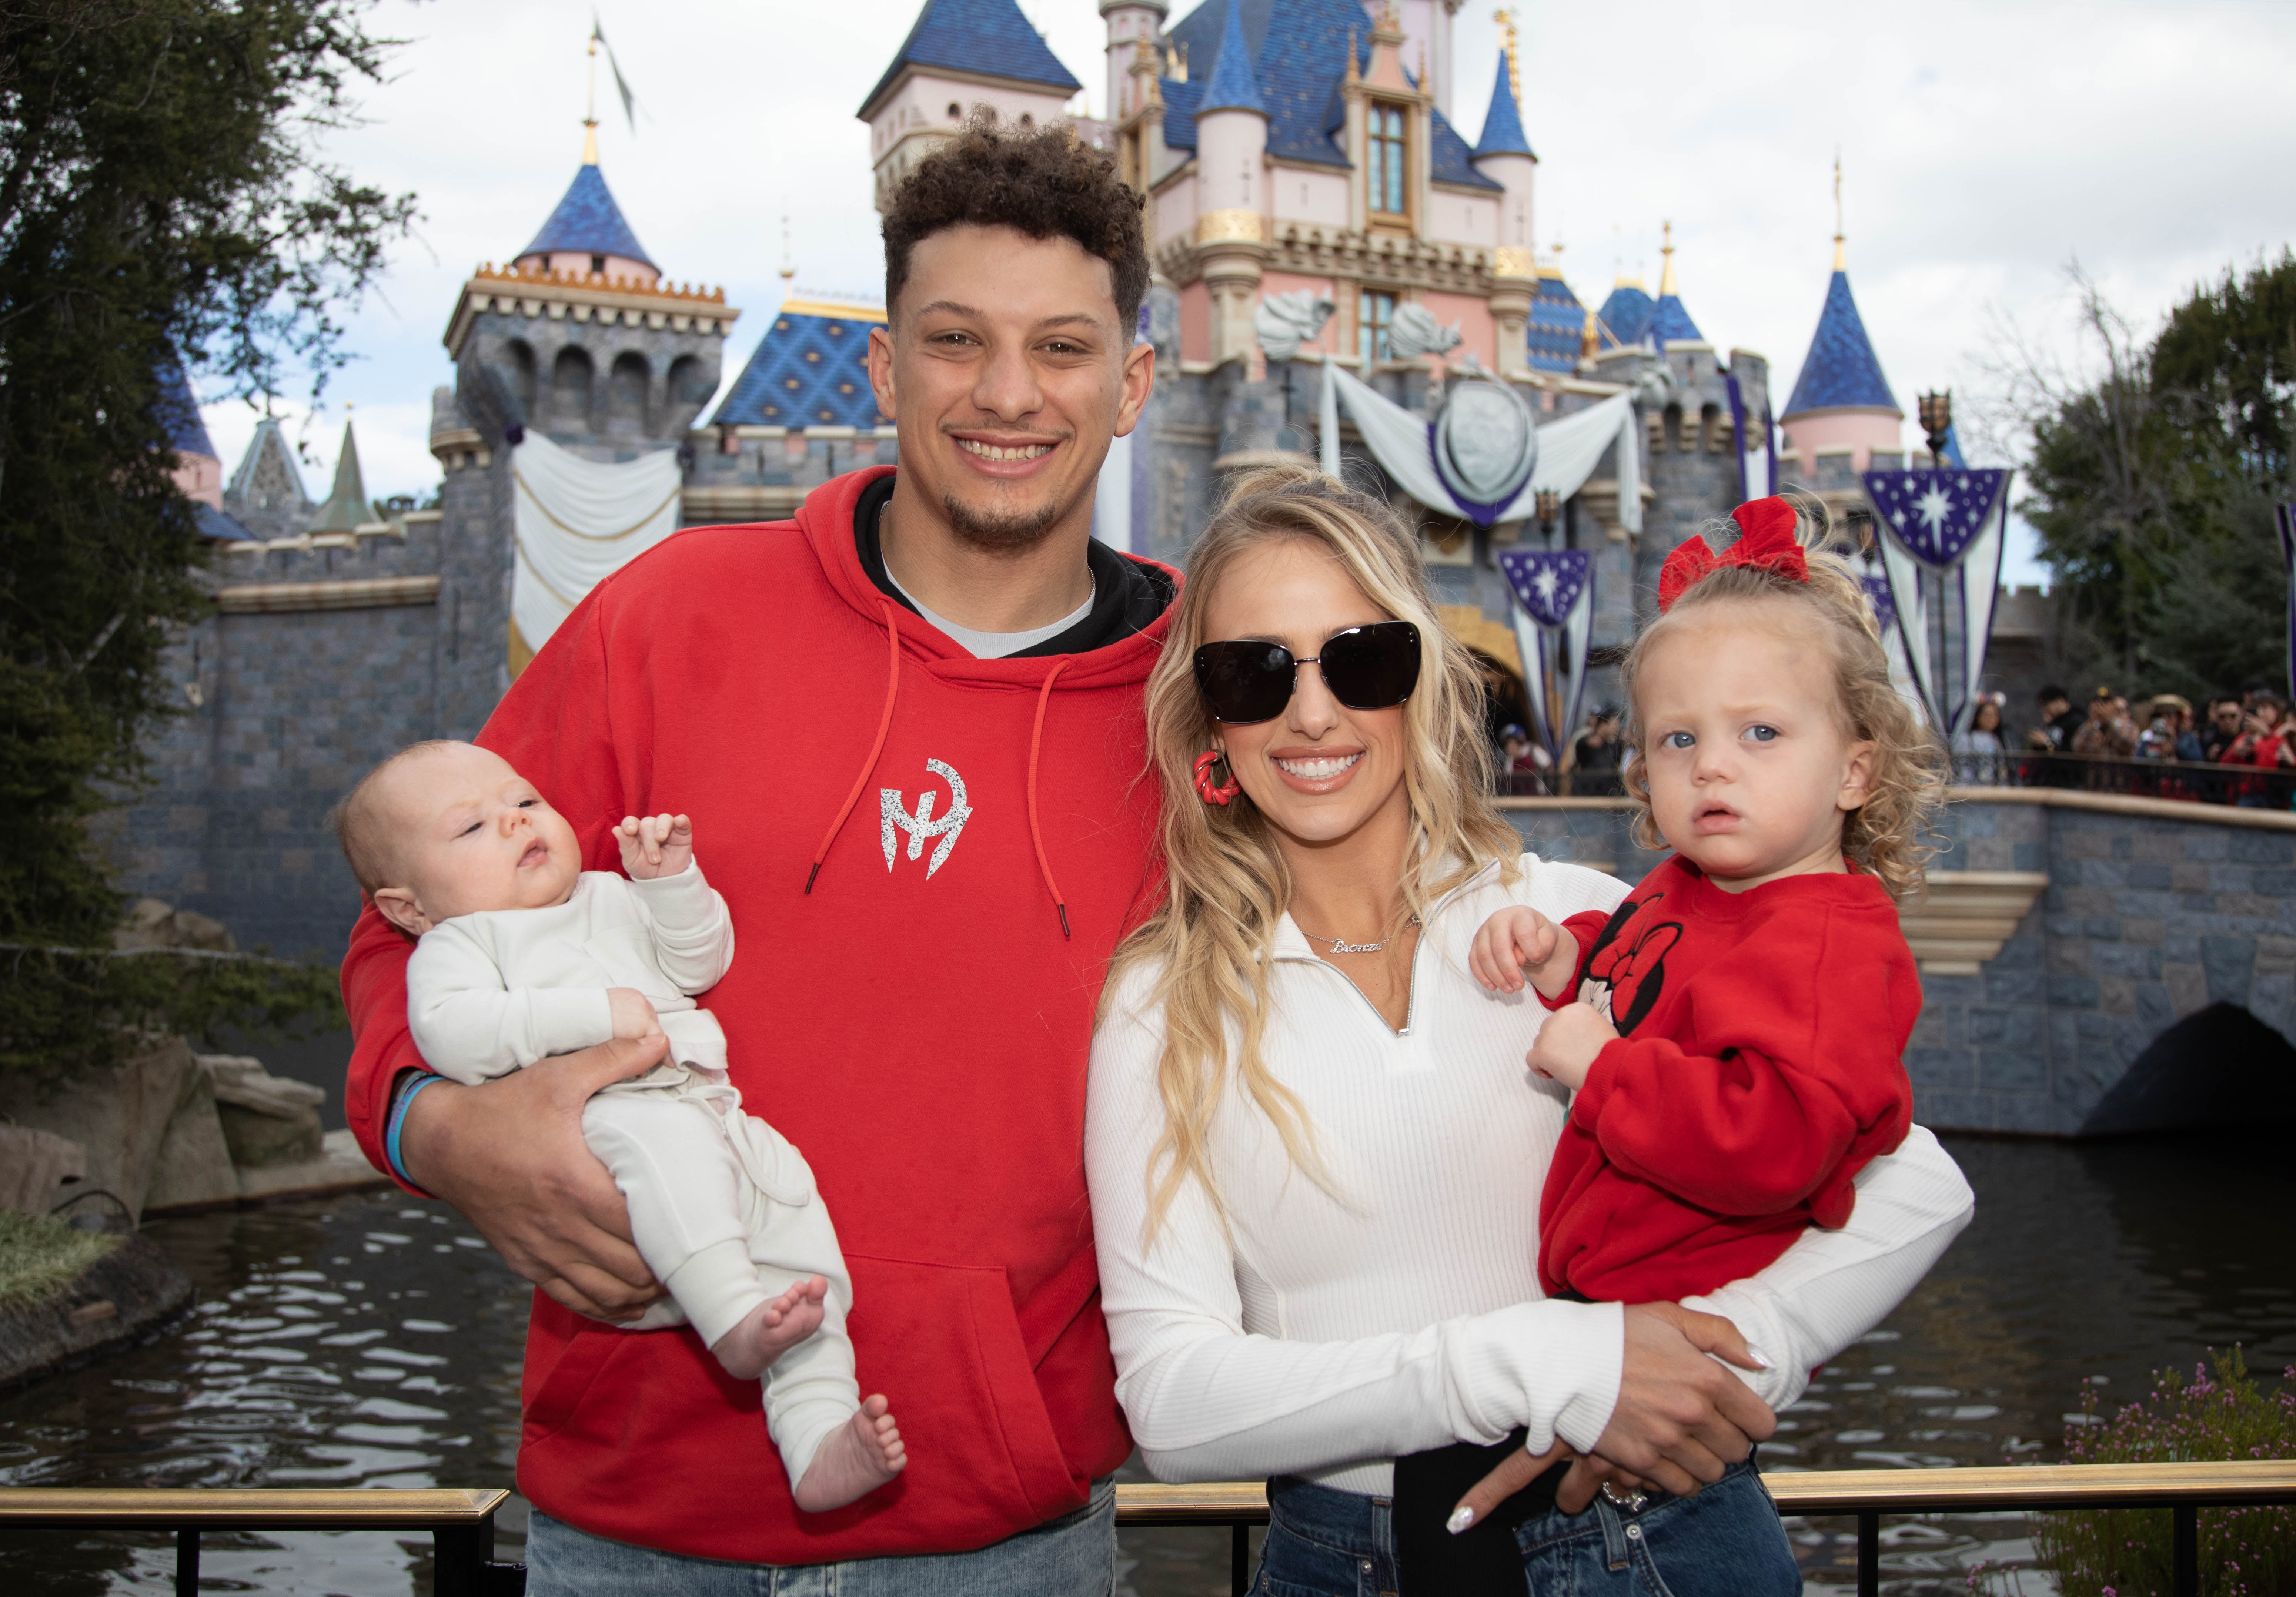 Who is Patrick Mahomes' Wife? All About Brittany Mahomes - Parade